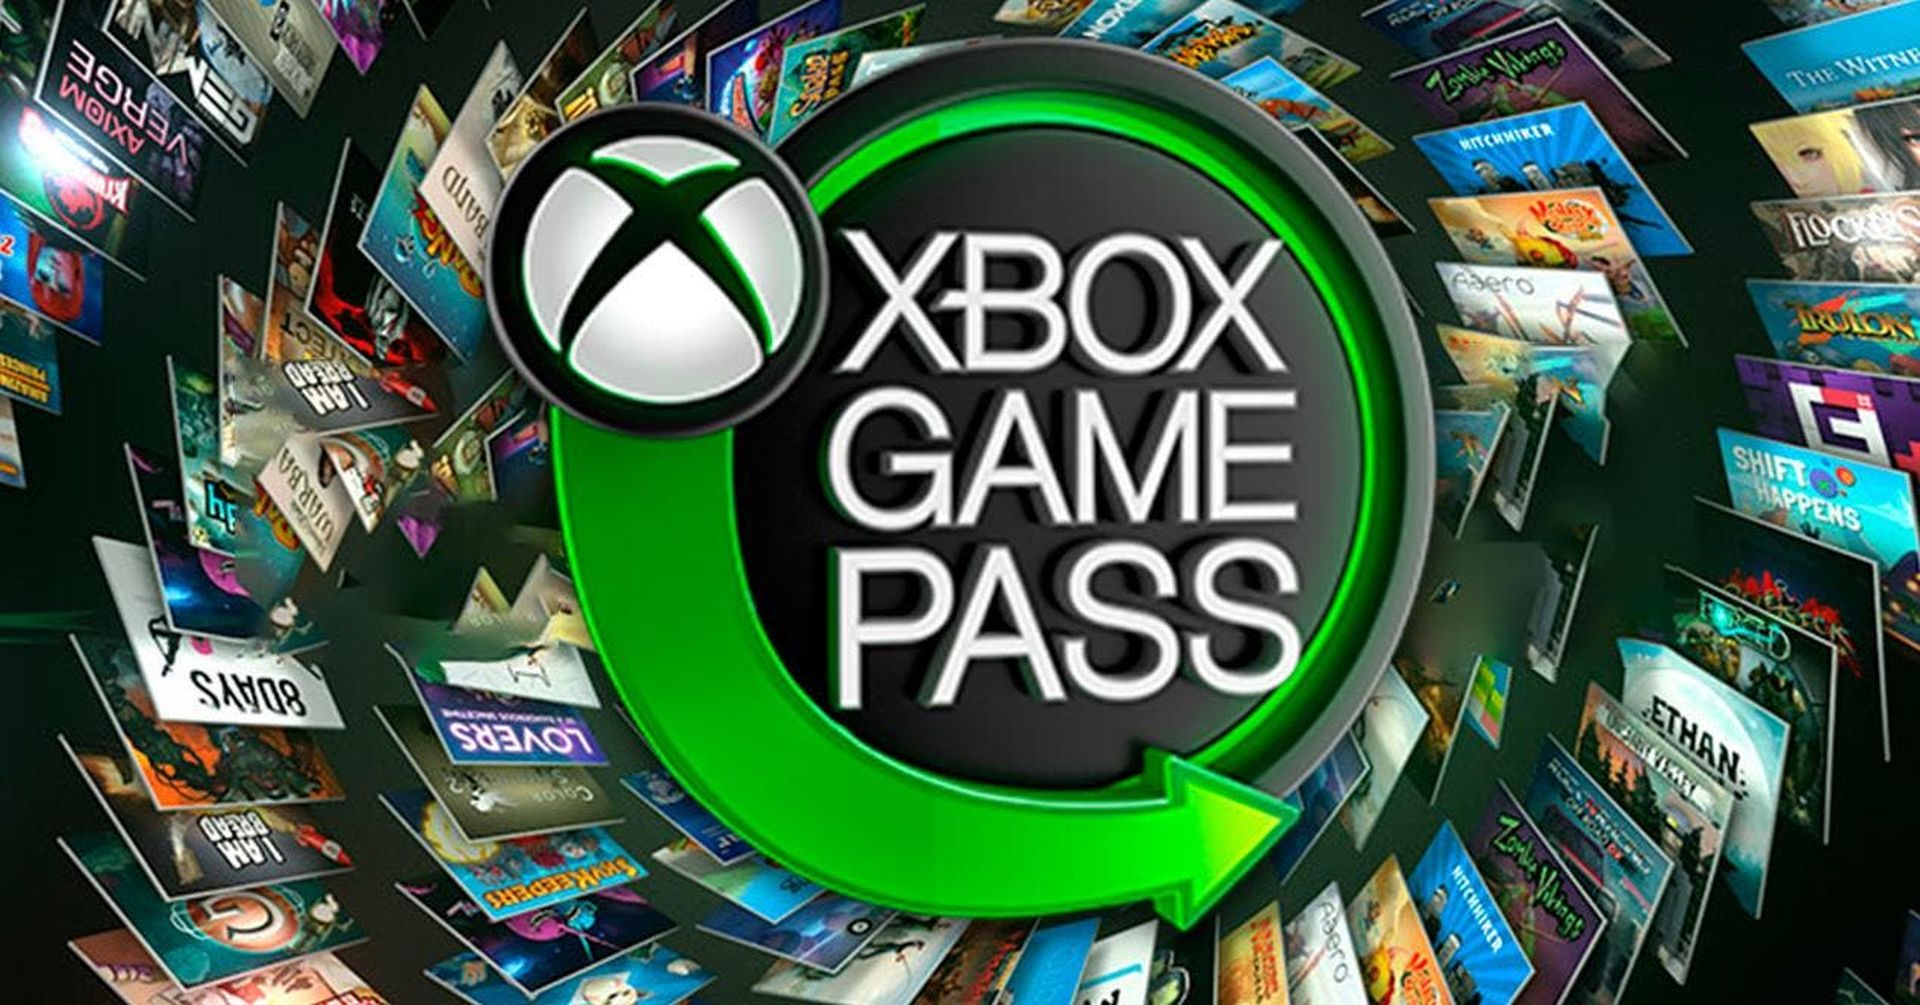 Xbox Game Pass age restriction bug: How to fix it in 2022?